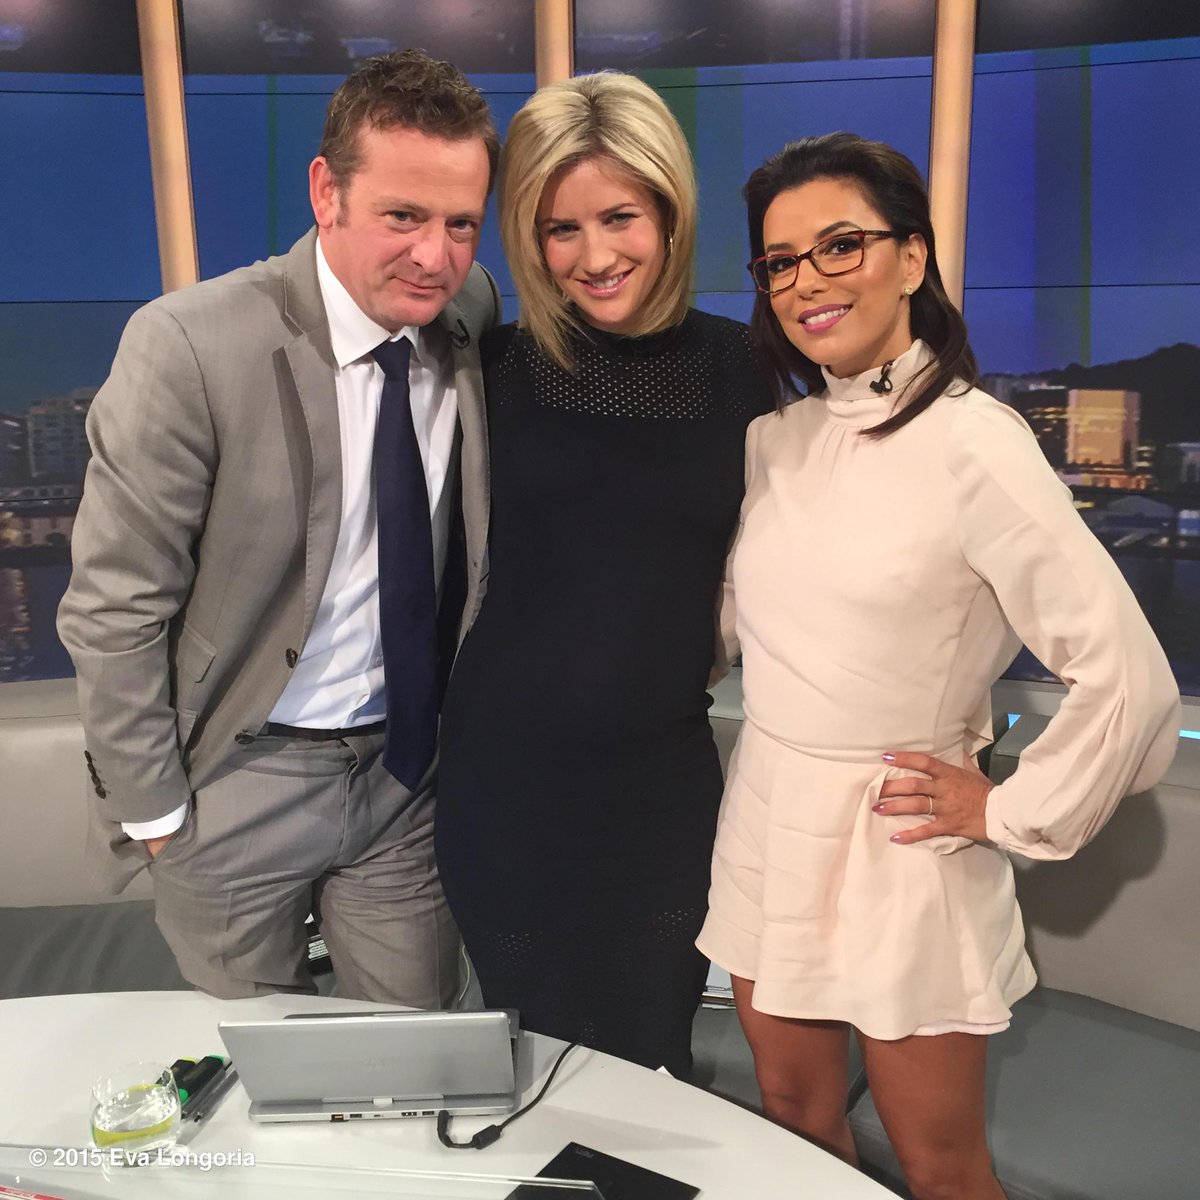 This morning on @BreakfastOnOne with @AliPugh and @RawdonChristie! #SpecsaversStyle http://t.co/IxUAlIClWm